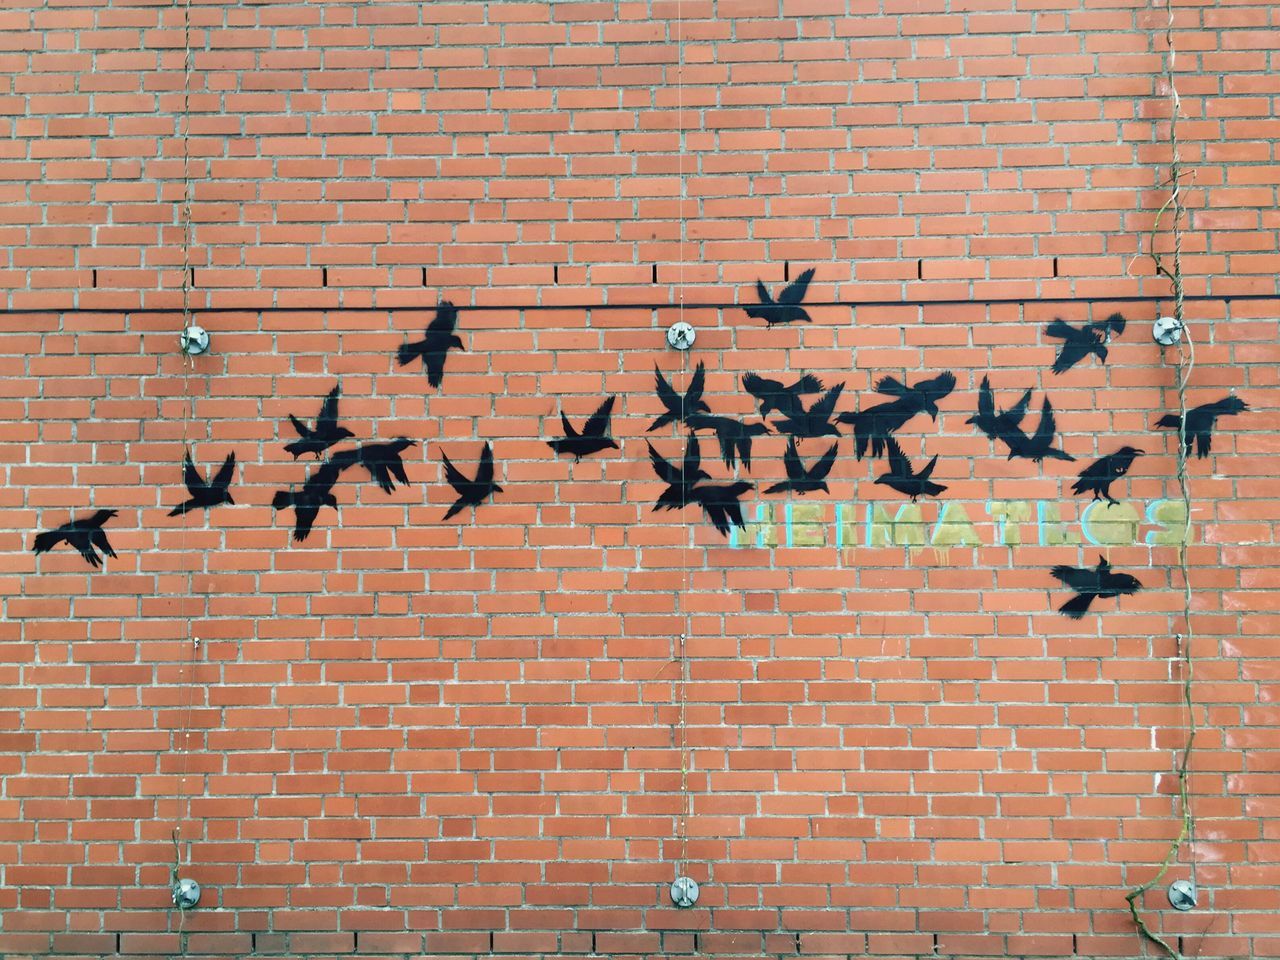 brick wall, bird, built structure, architecture, building exterior, wall - building feature, animal themes, full frame, wildlife, animals in the wild, backgrounds, brick, pattern, outdoors, flock of birds, day, red, pigeon, wall